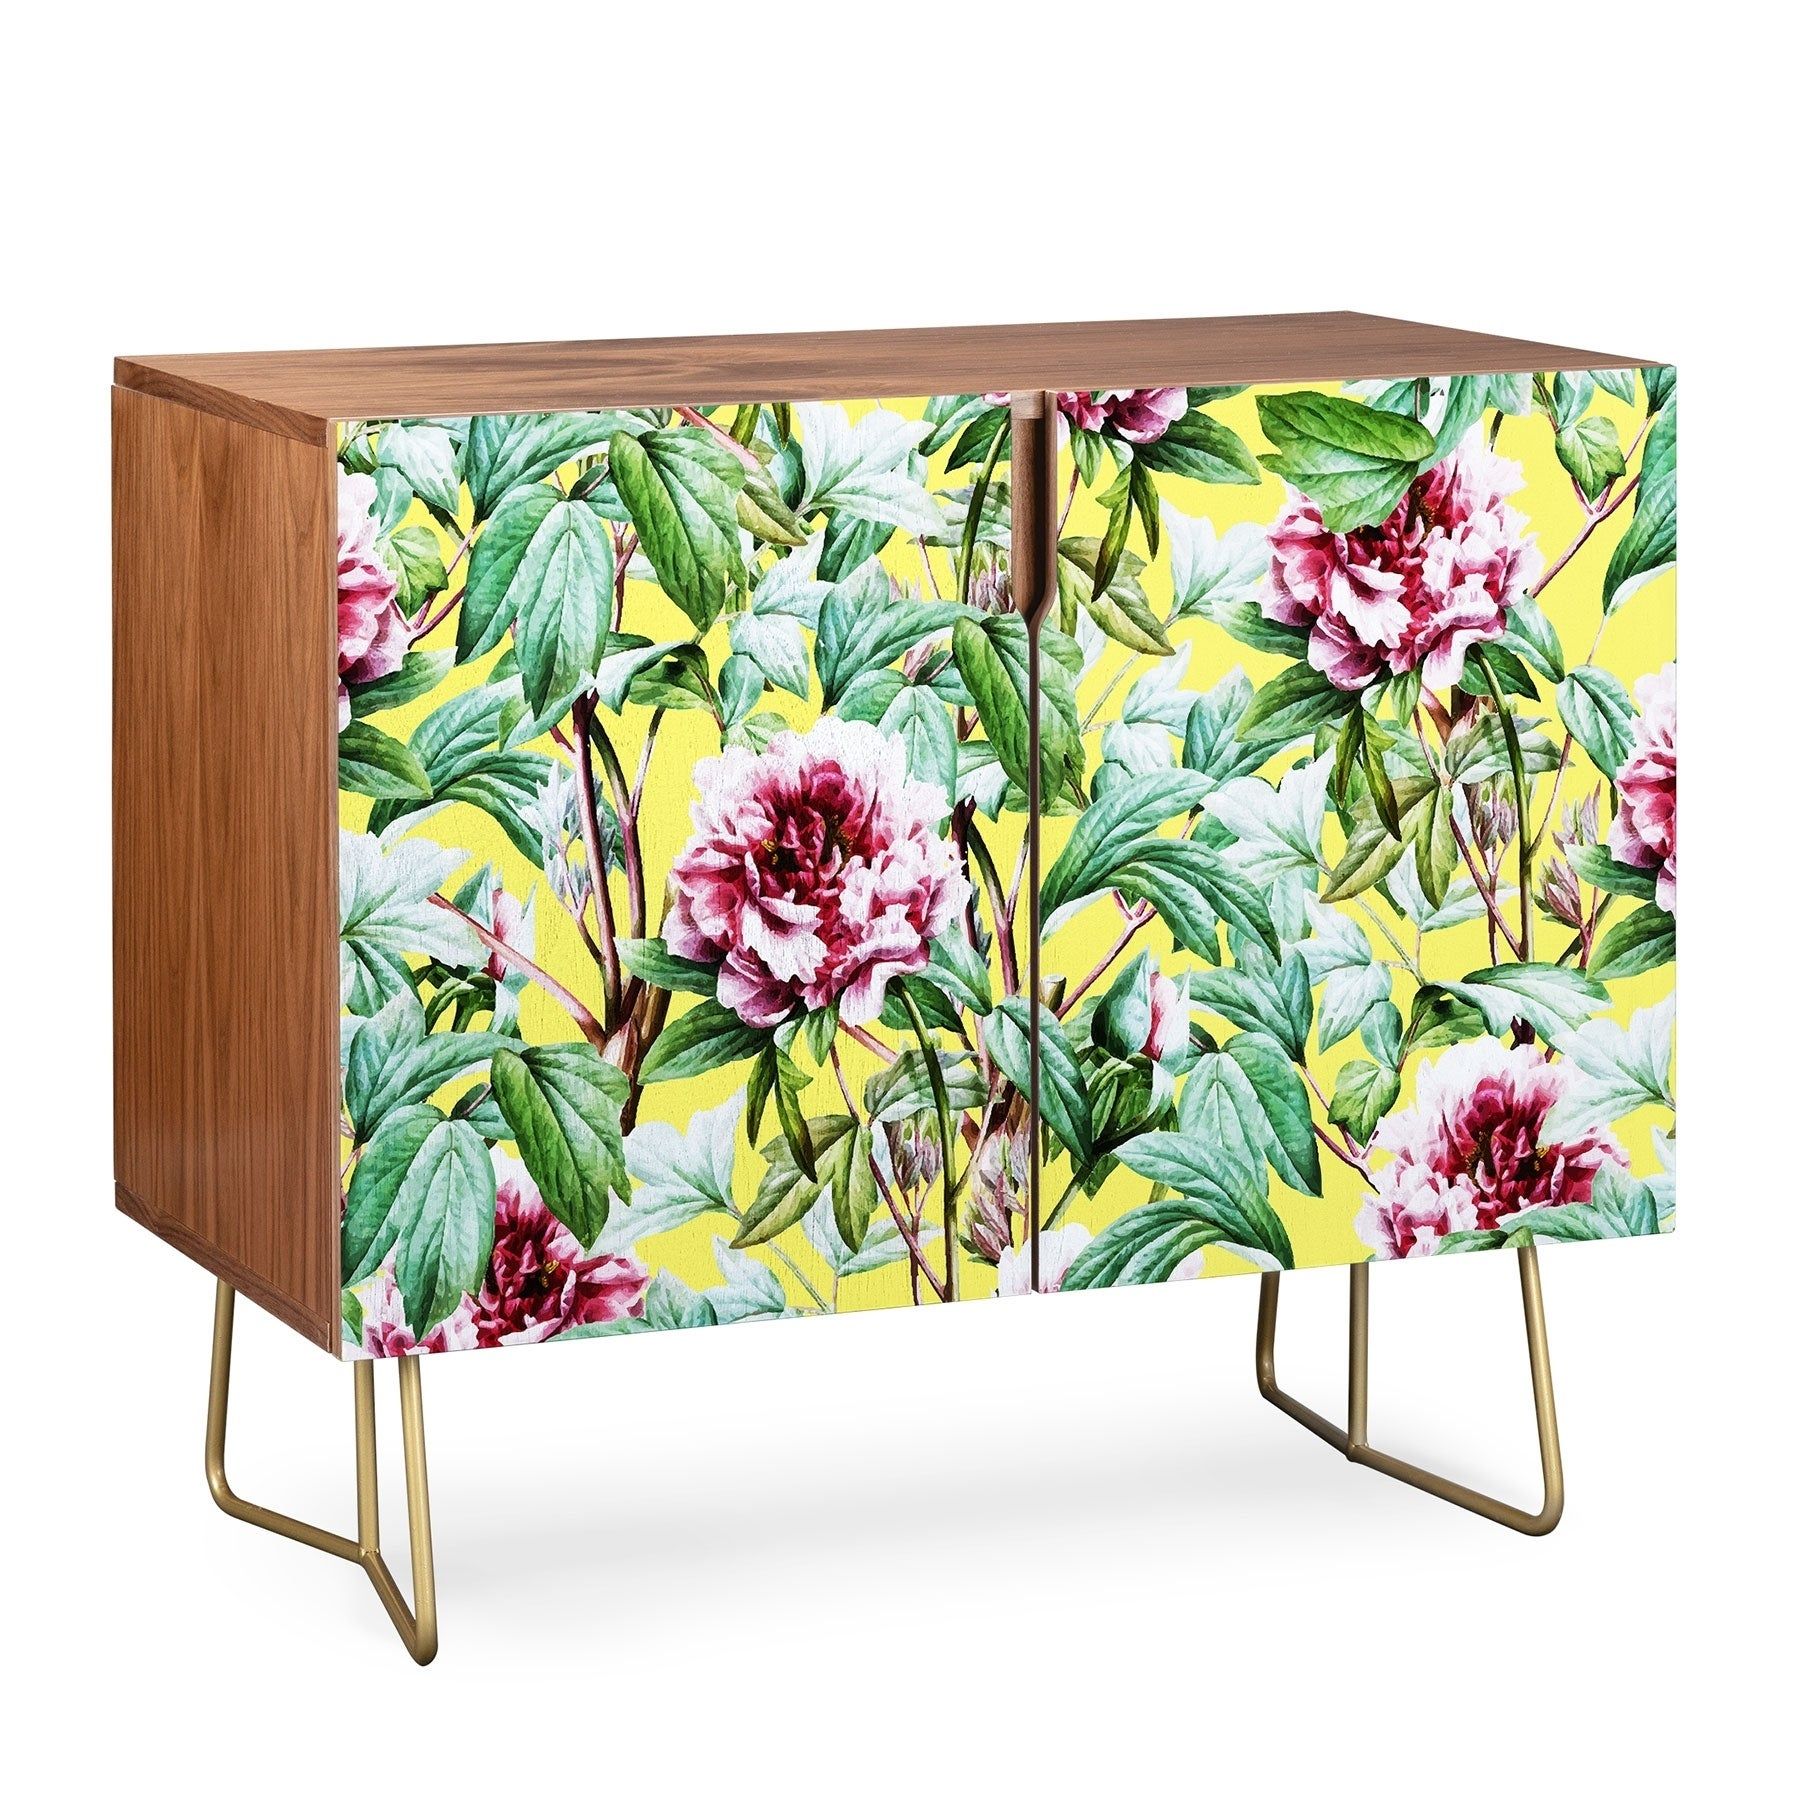 Deny Designs Yellow Flora Credenza (birch Or Walnut, 2 Leg Options) For Oenomel Credenzas (View 30 of 30)